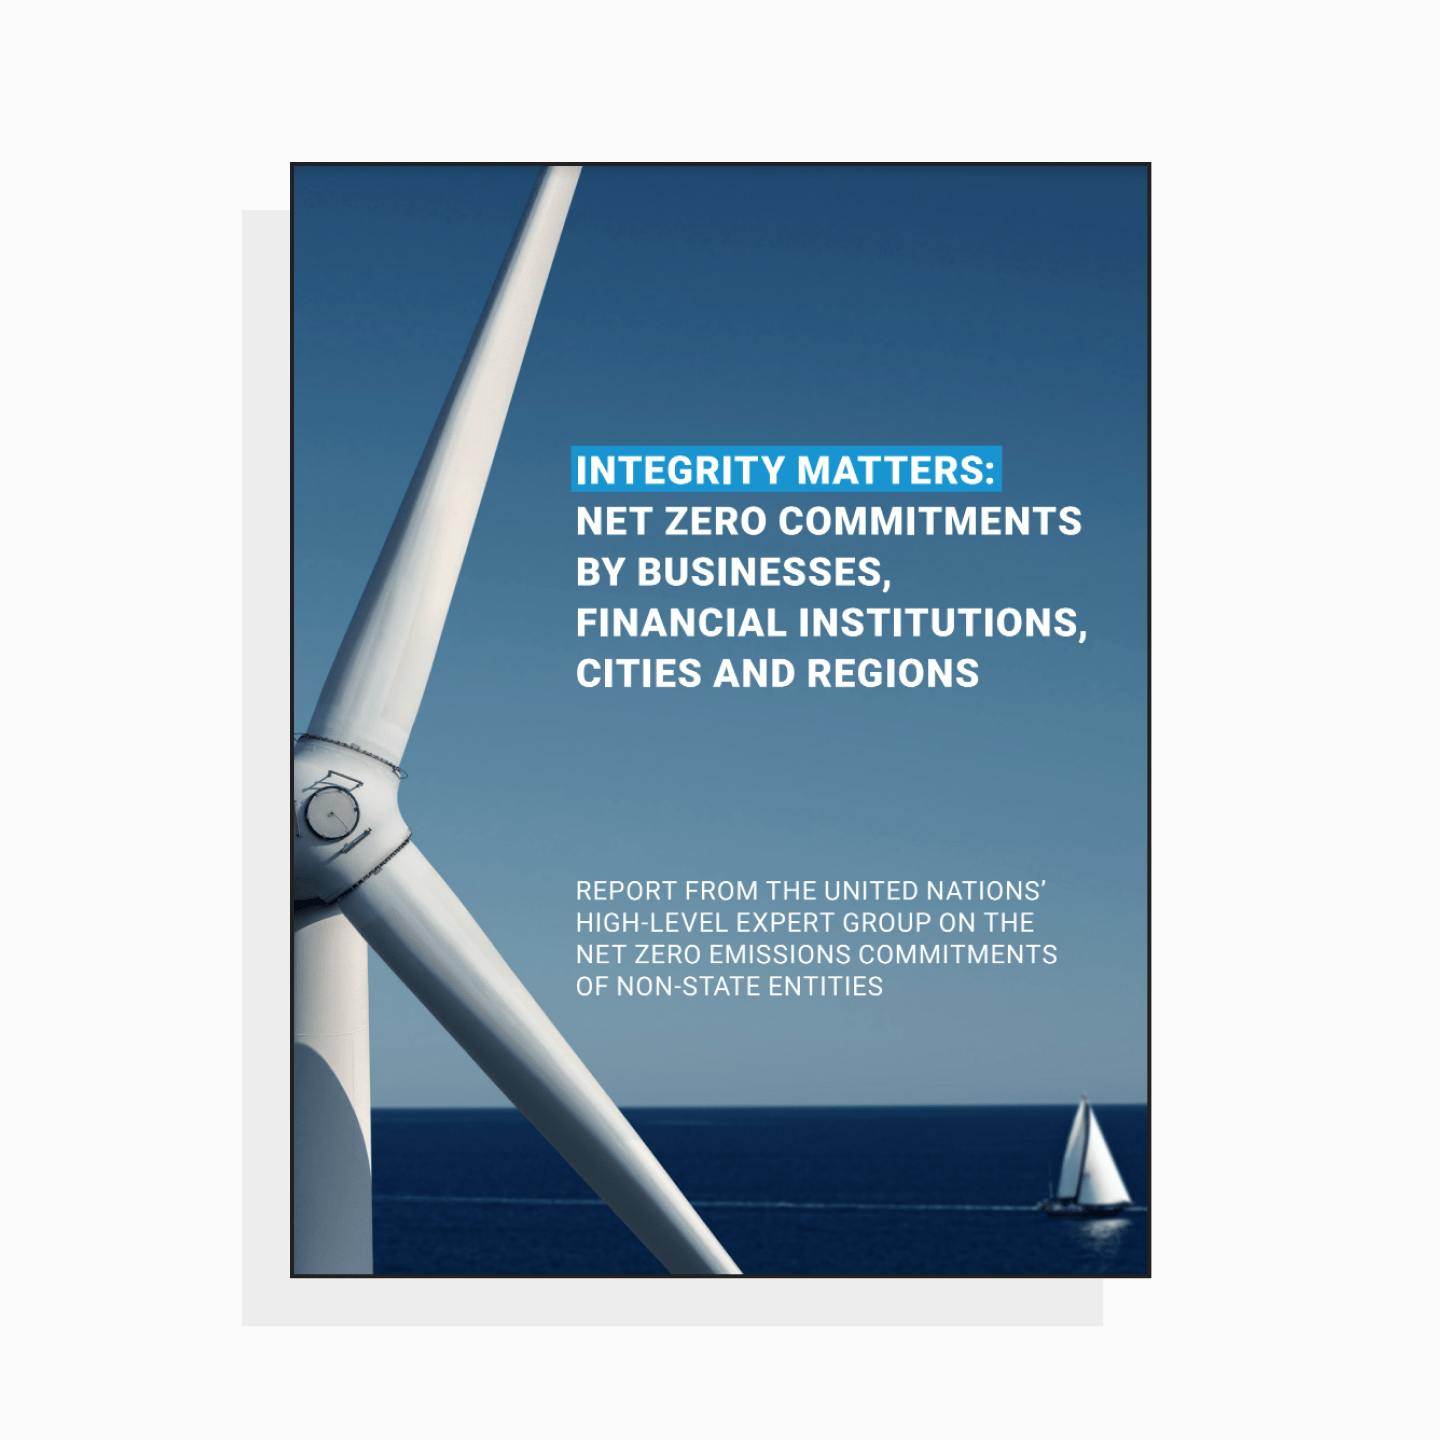 Integrity Matters: net zero commitments by businesses, financial institutions, cities, and regions